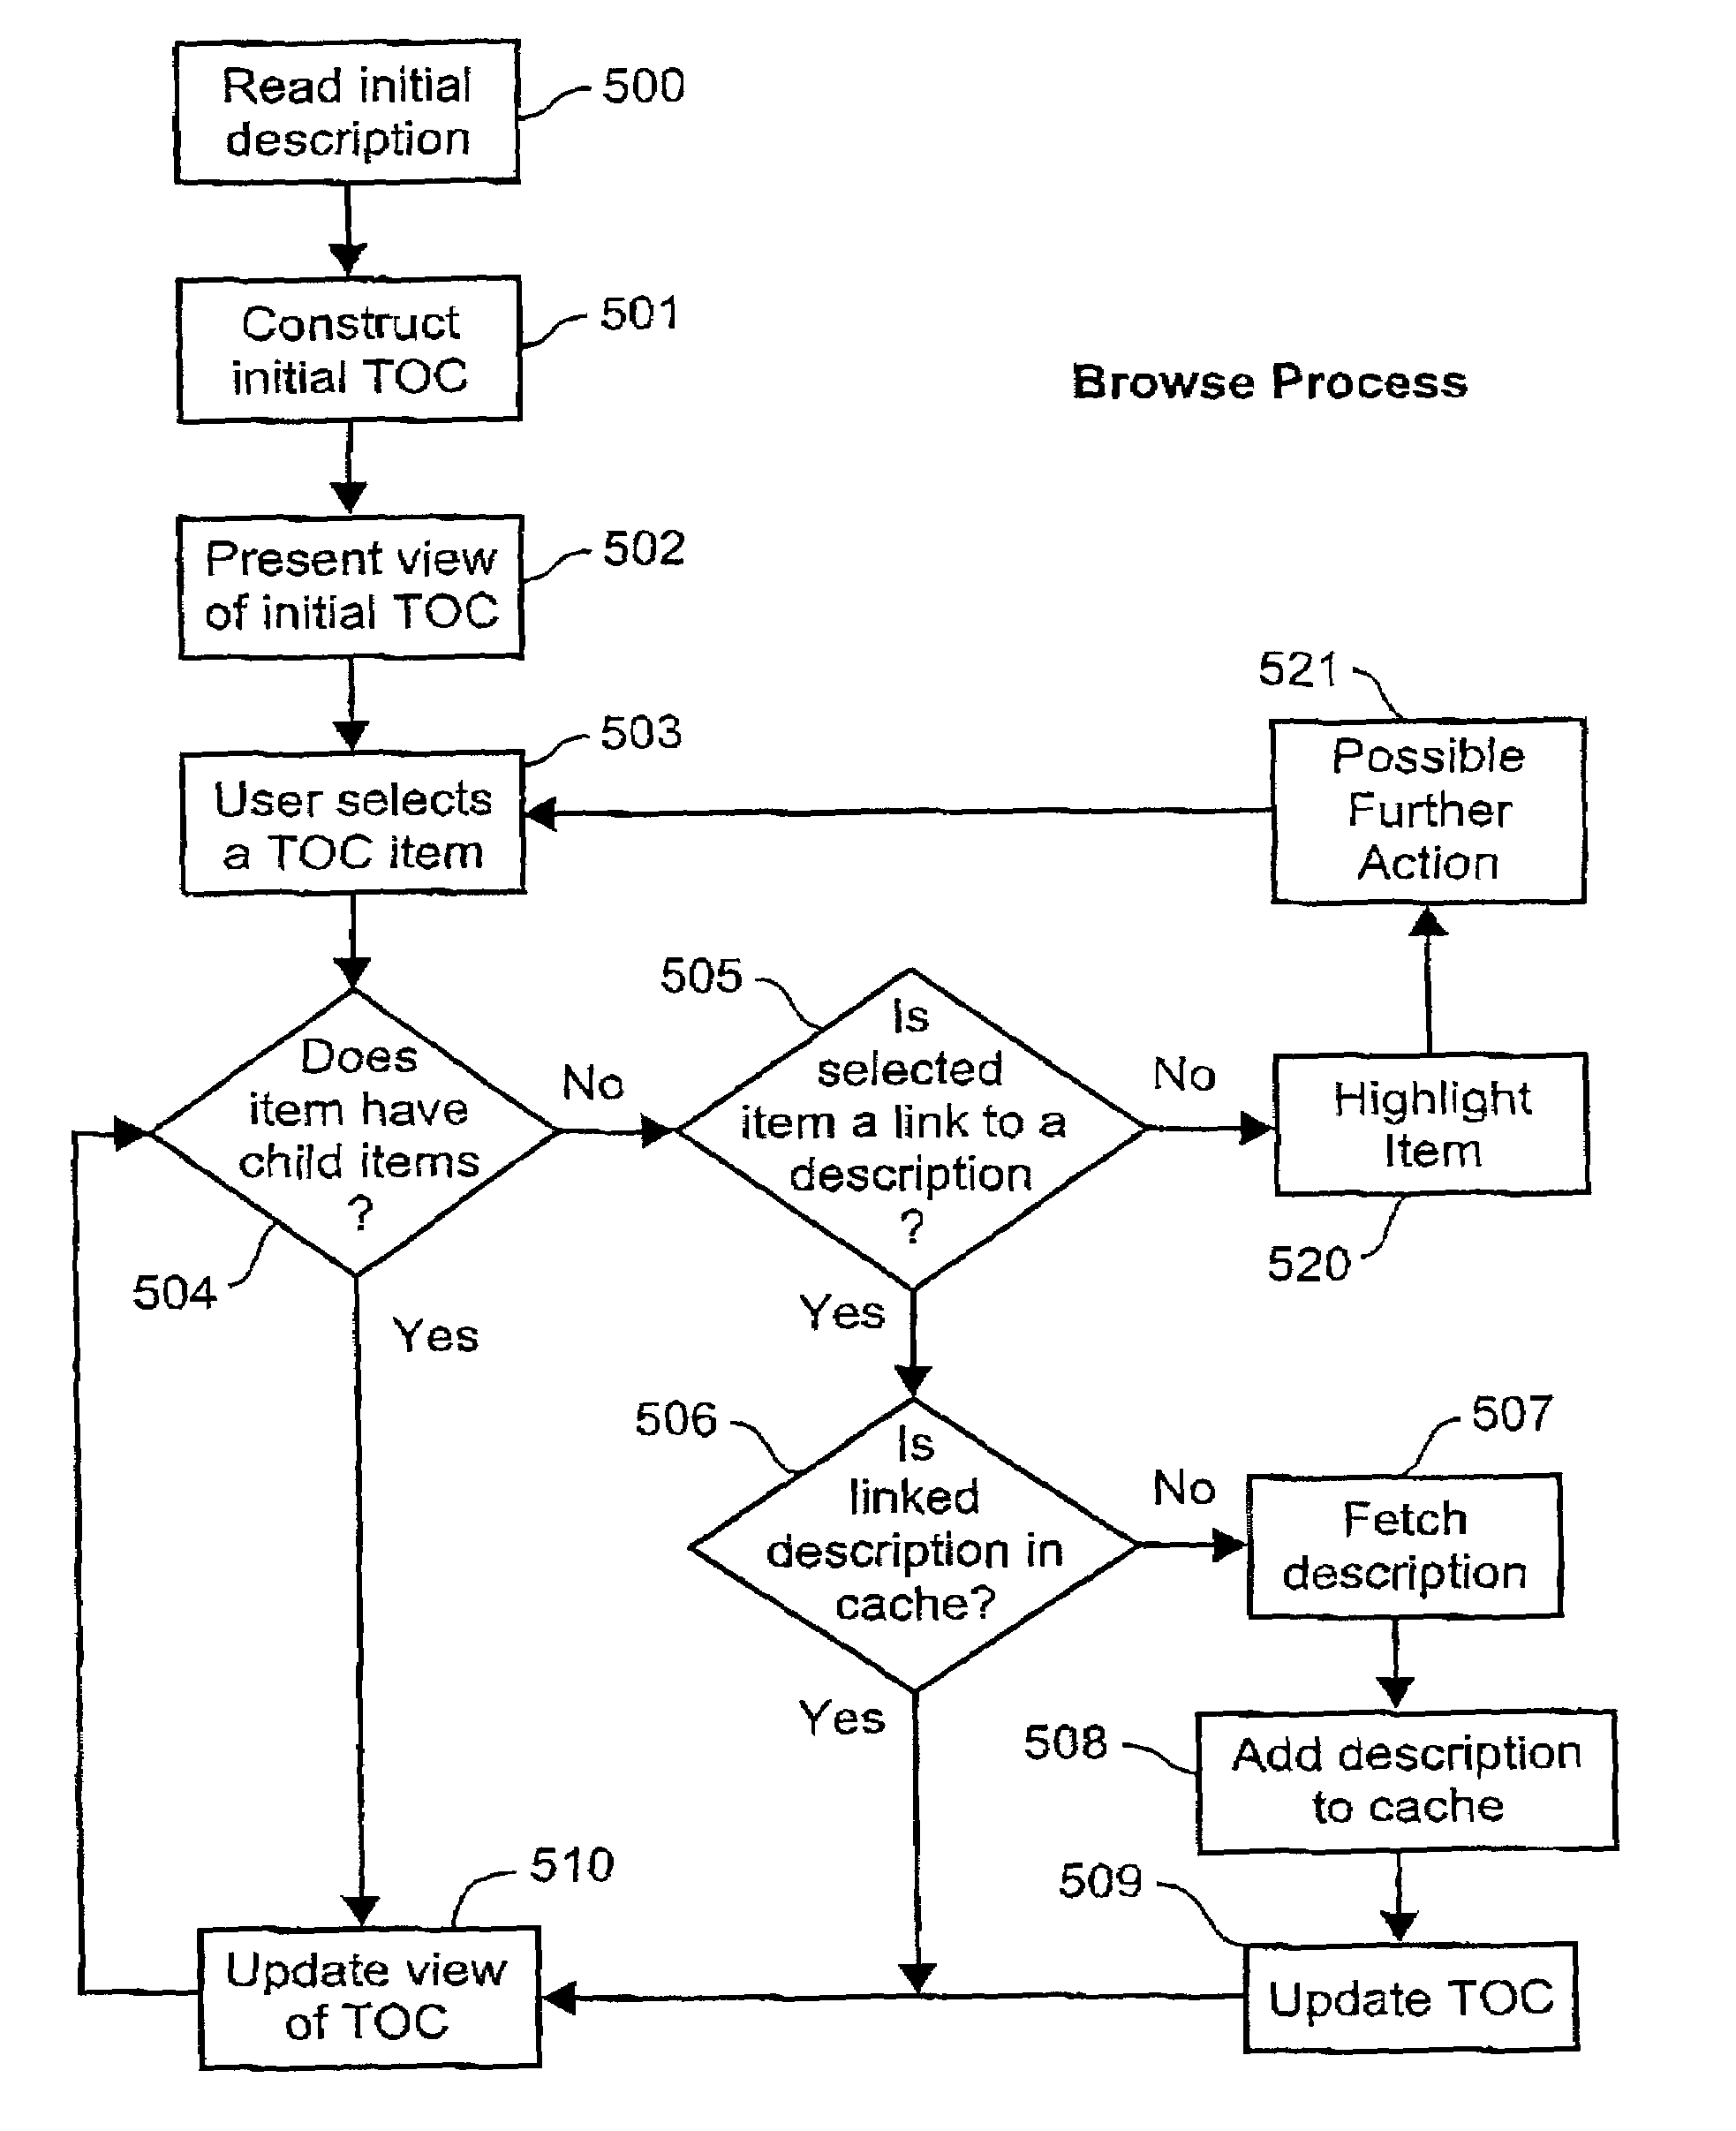 Method for facilitating access to multimedia content